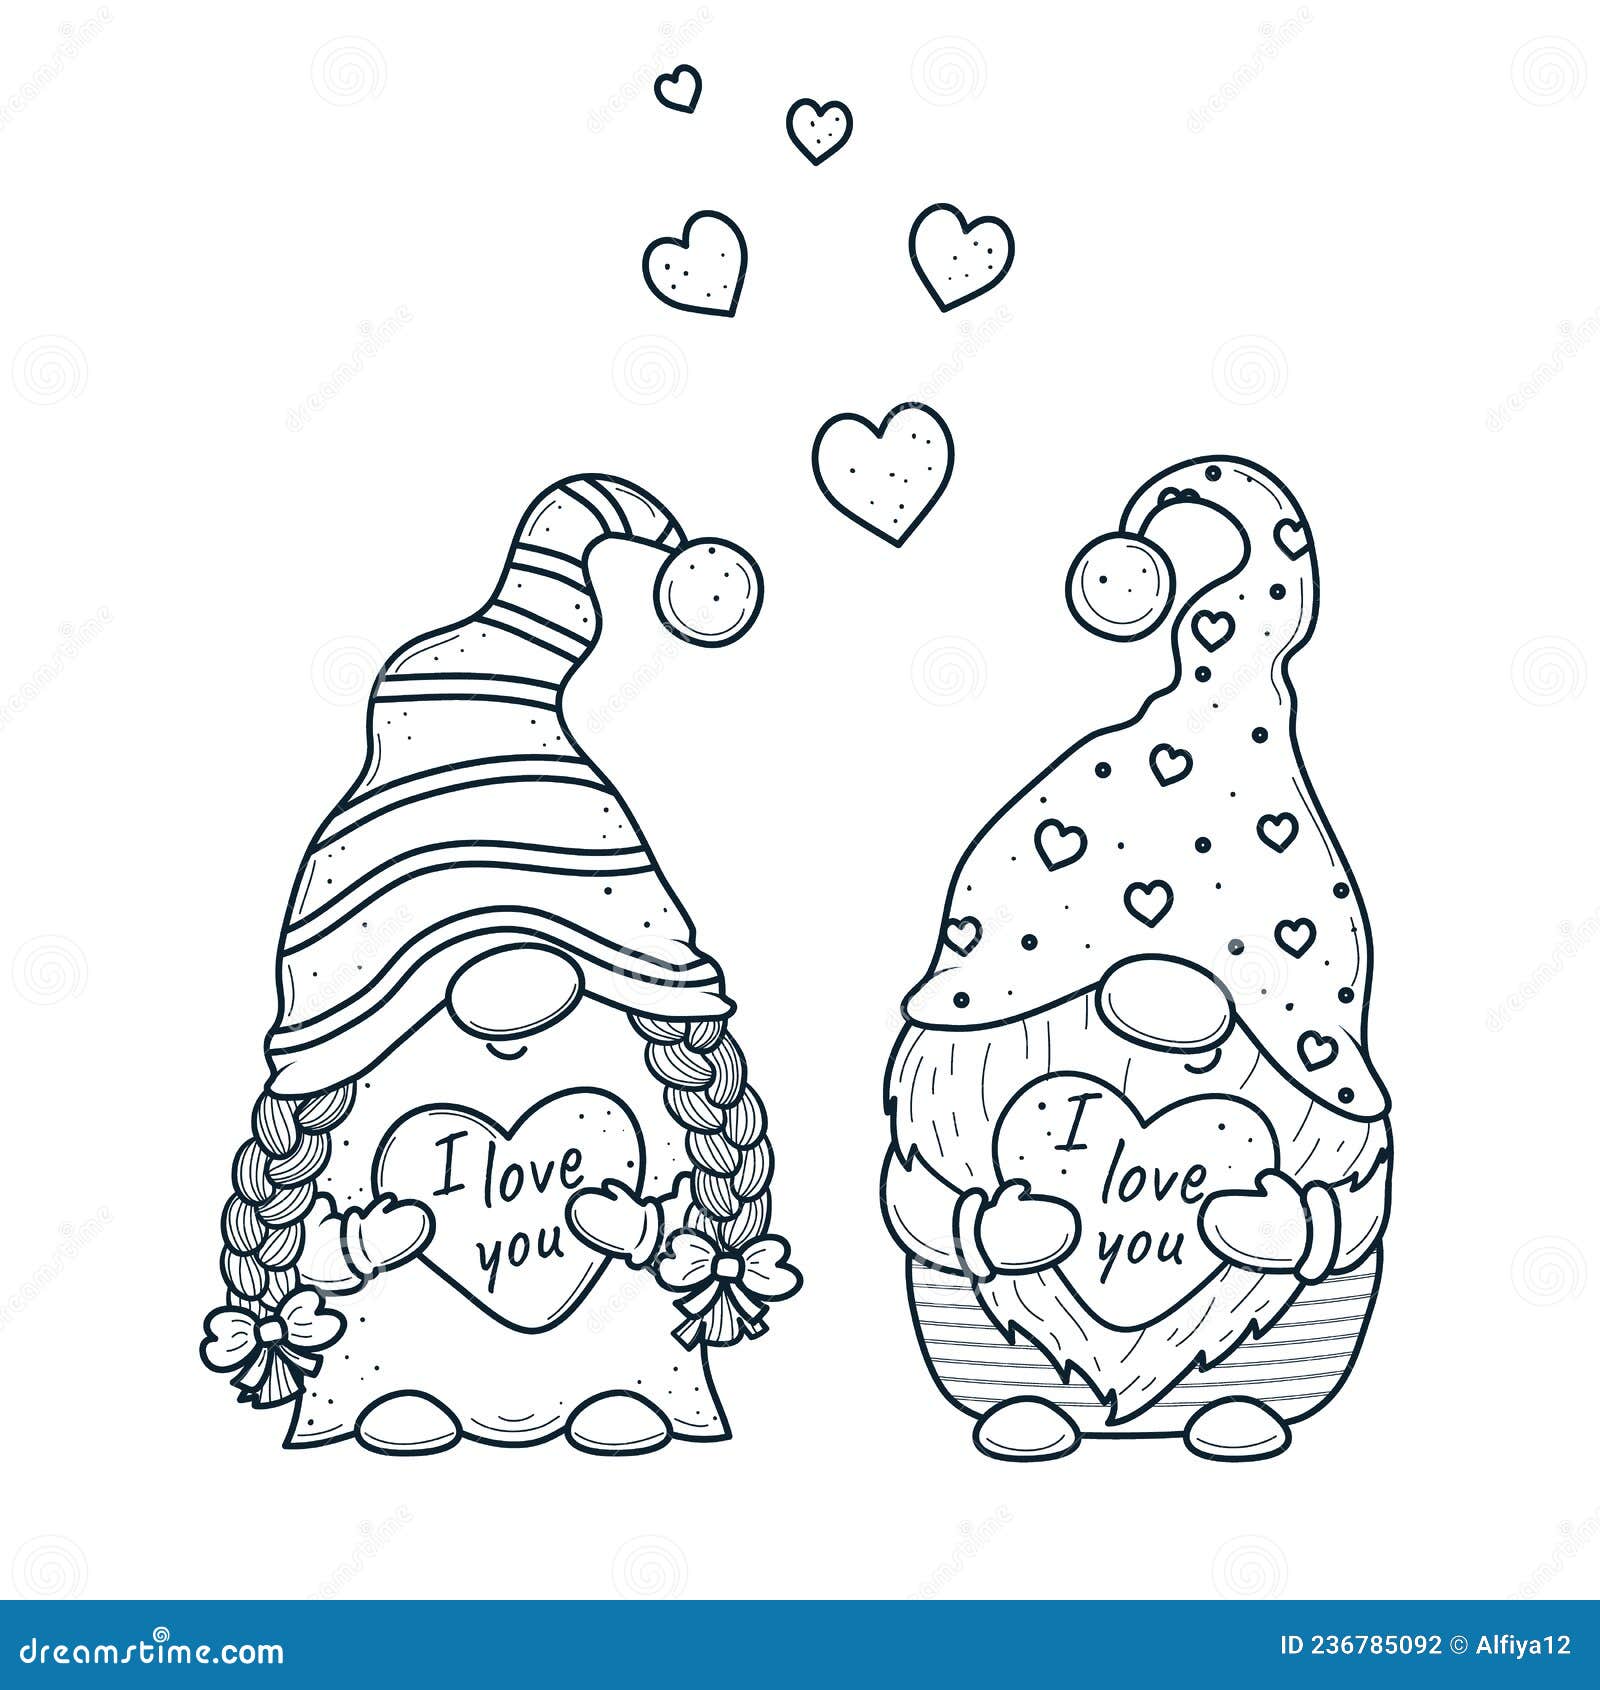 Cute valentine gnomes gnomes with hearts for coloring bookline art design for kids coloring page stock illustration